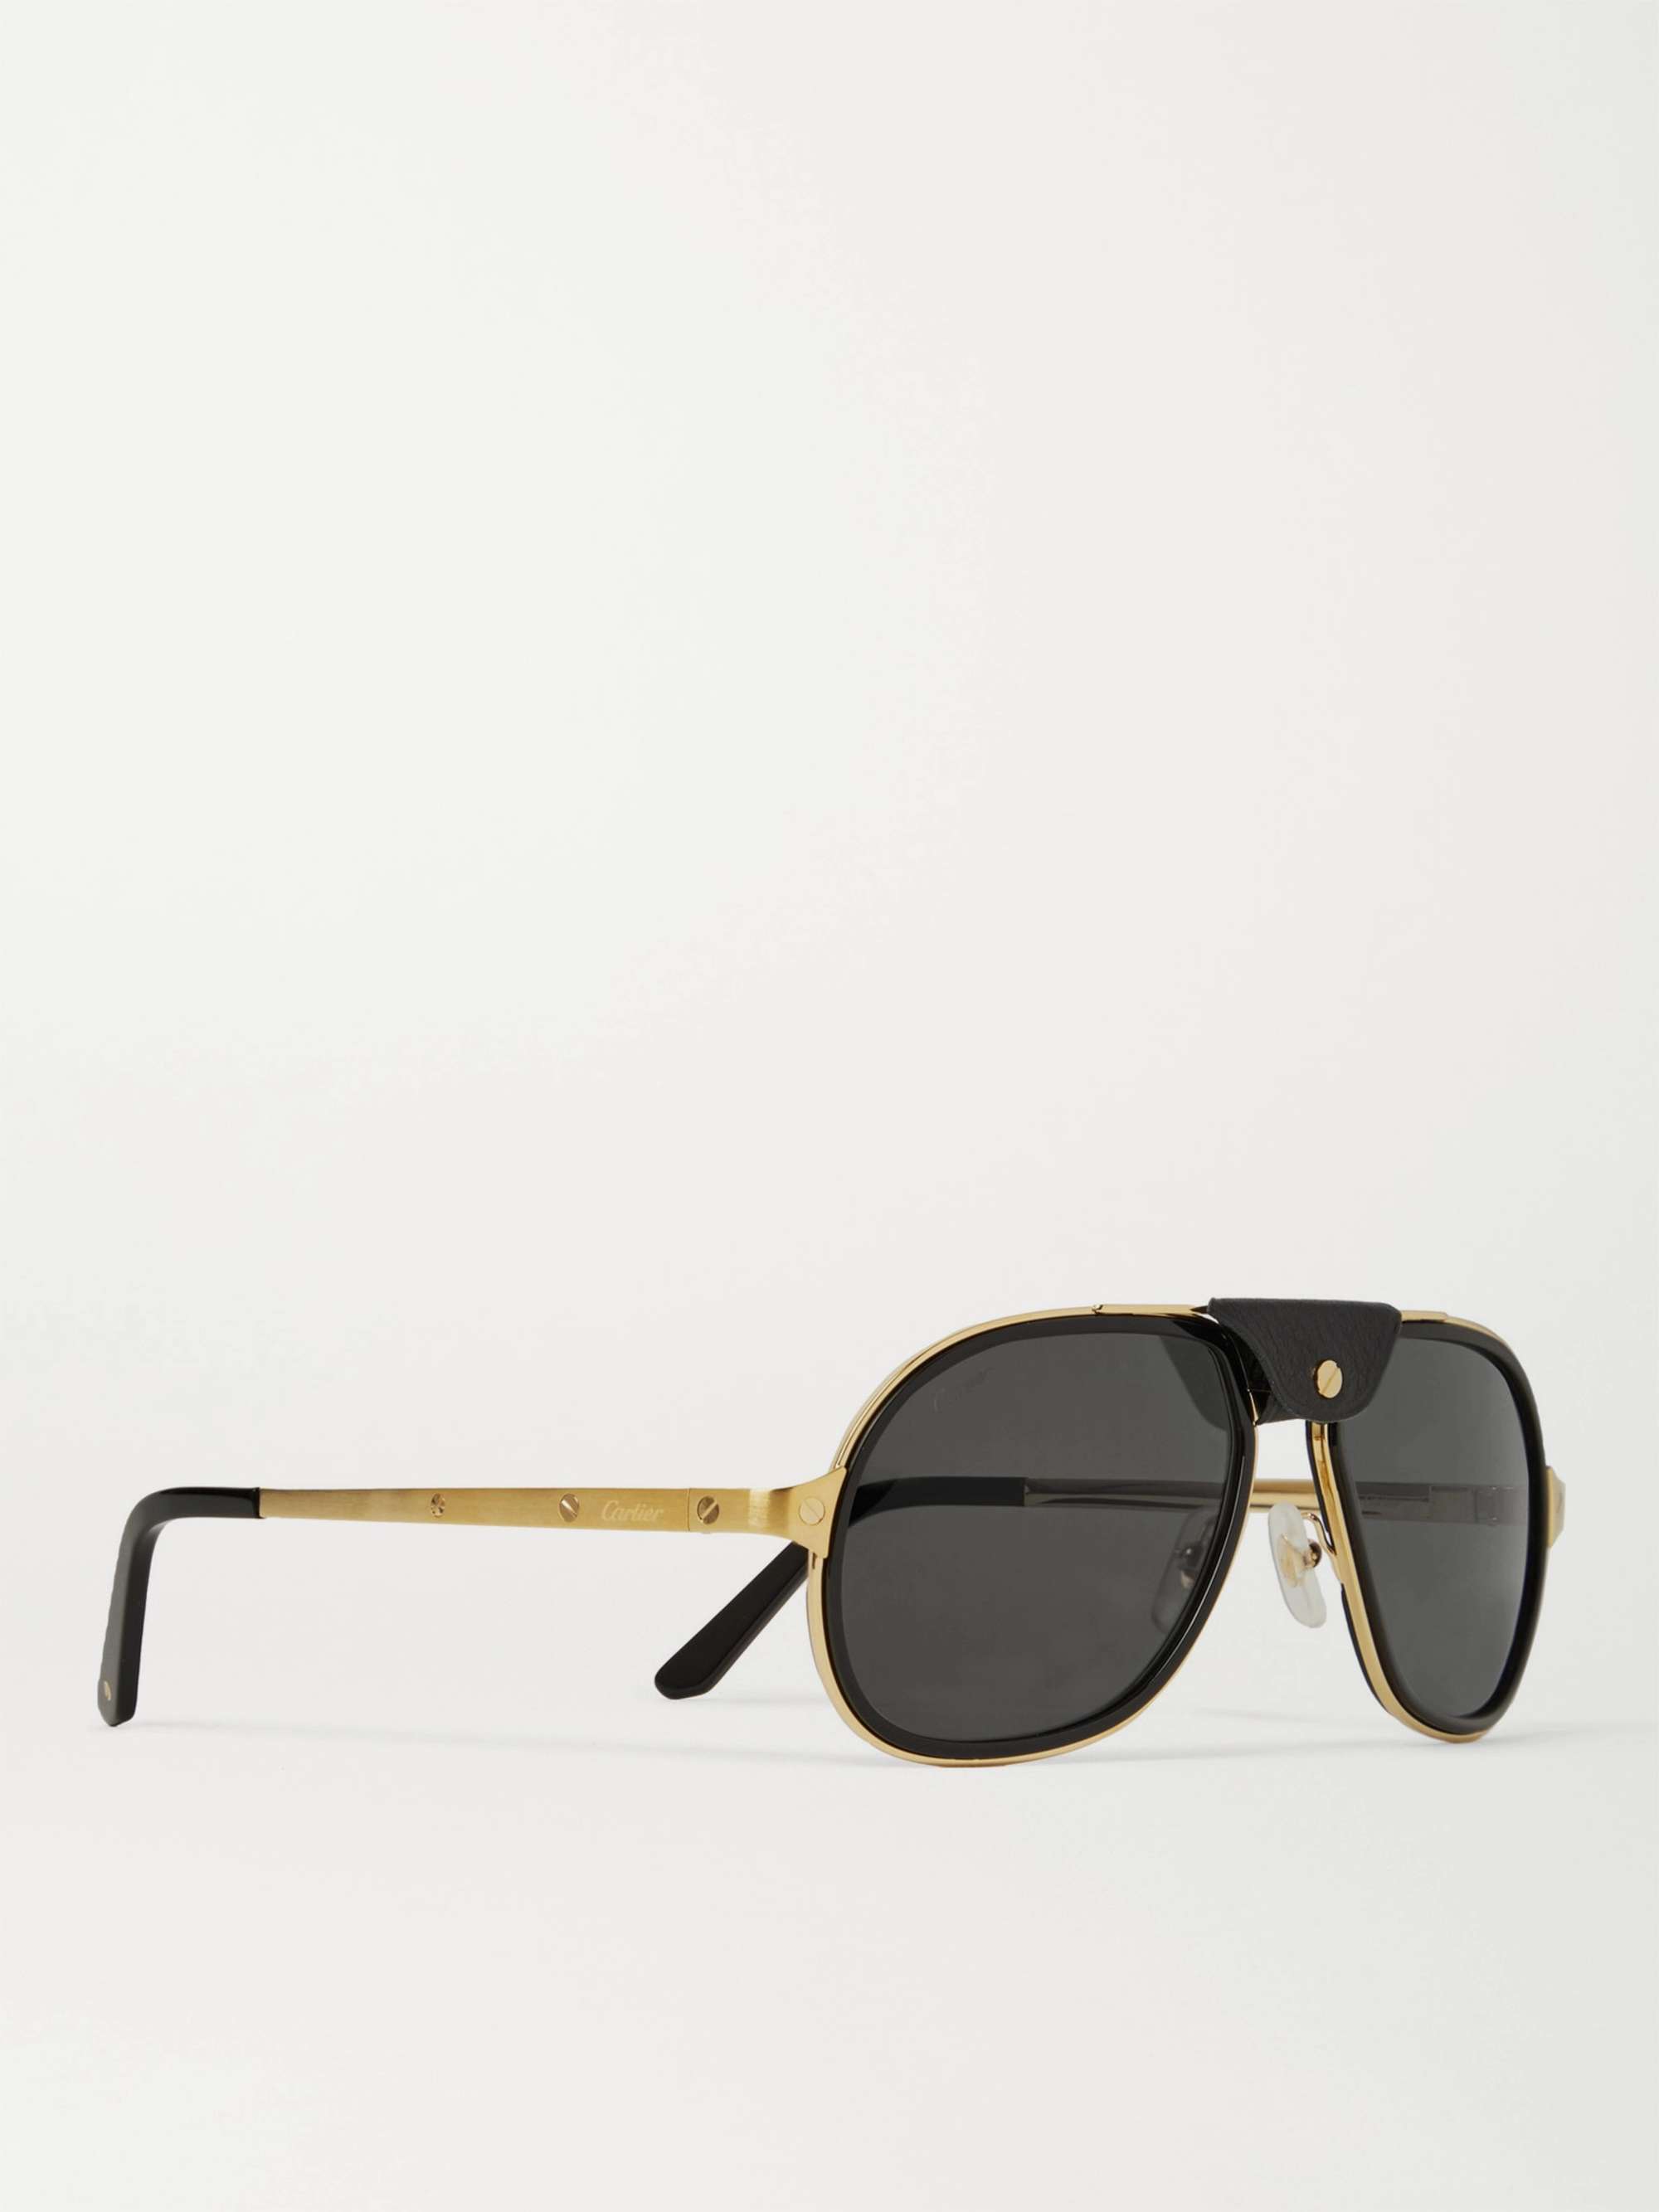 CARTIER EYEWEAR Aviator-Style Leather-Trimmed Gold-Tone and Acetate Sunglasses